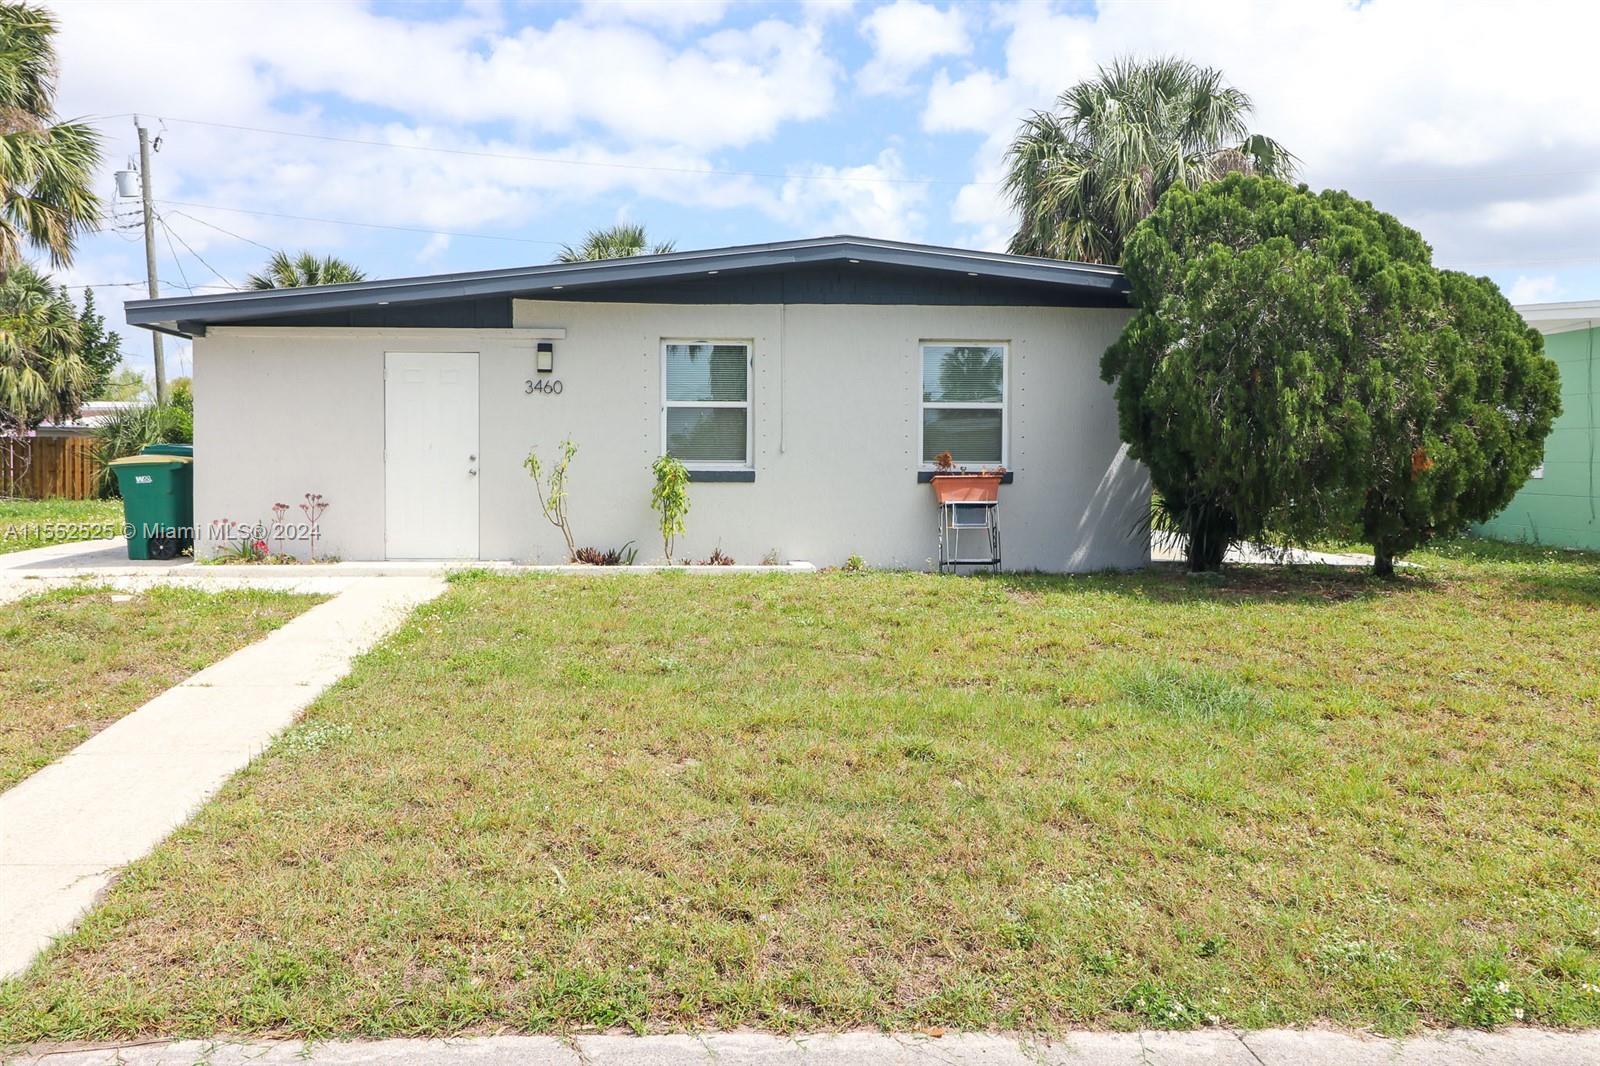 Photo of 3460 Normandy Dr in Port Charlotte, FL